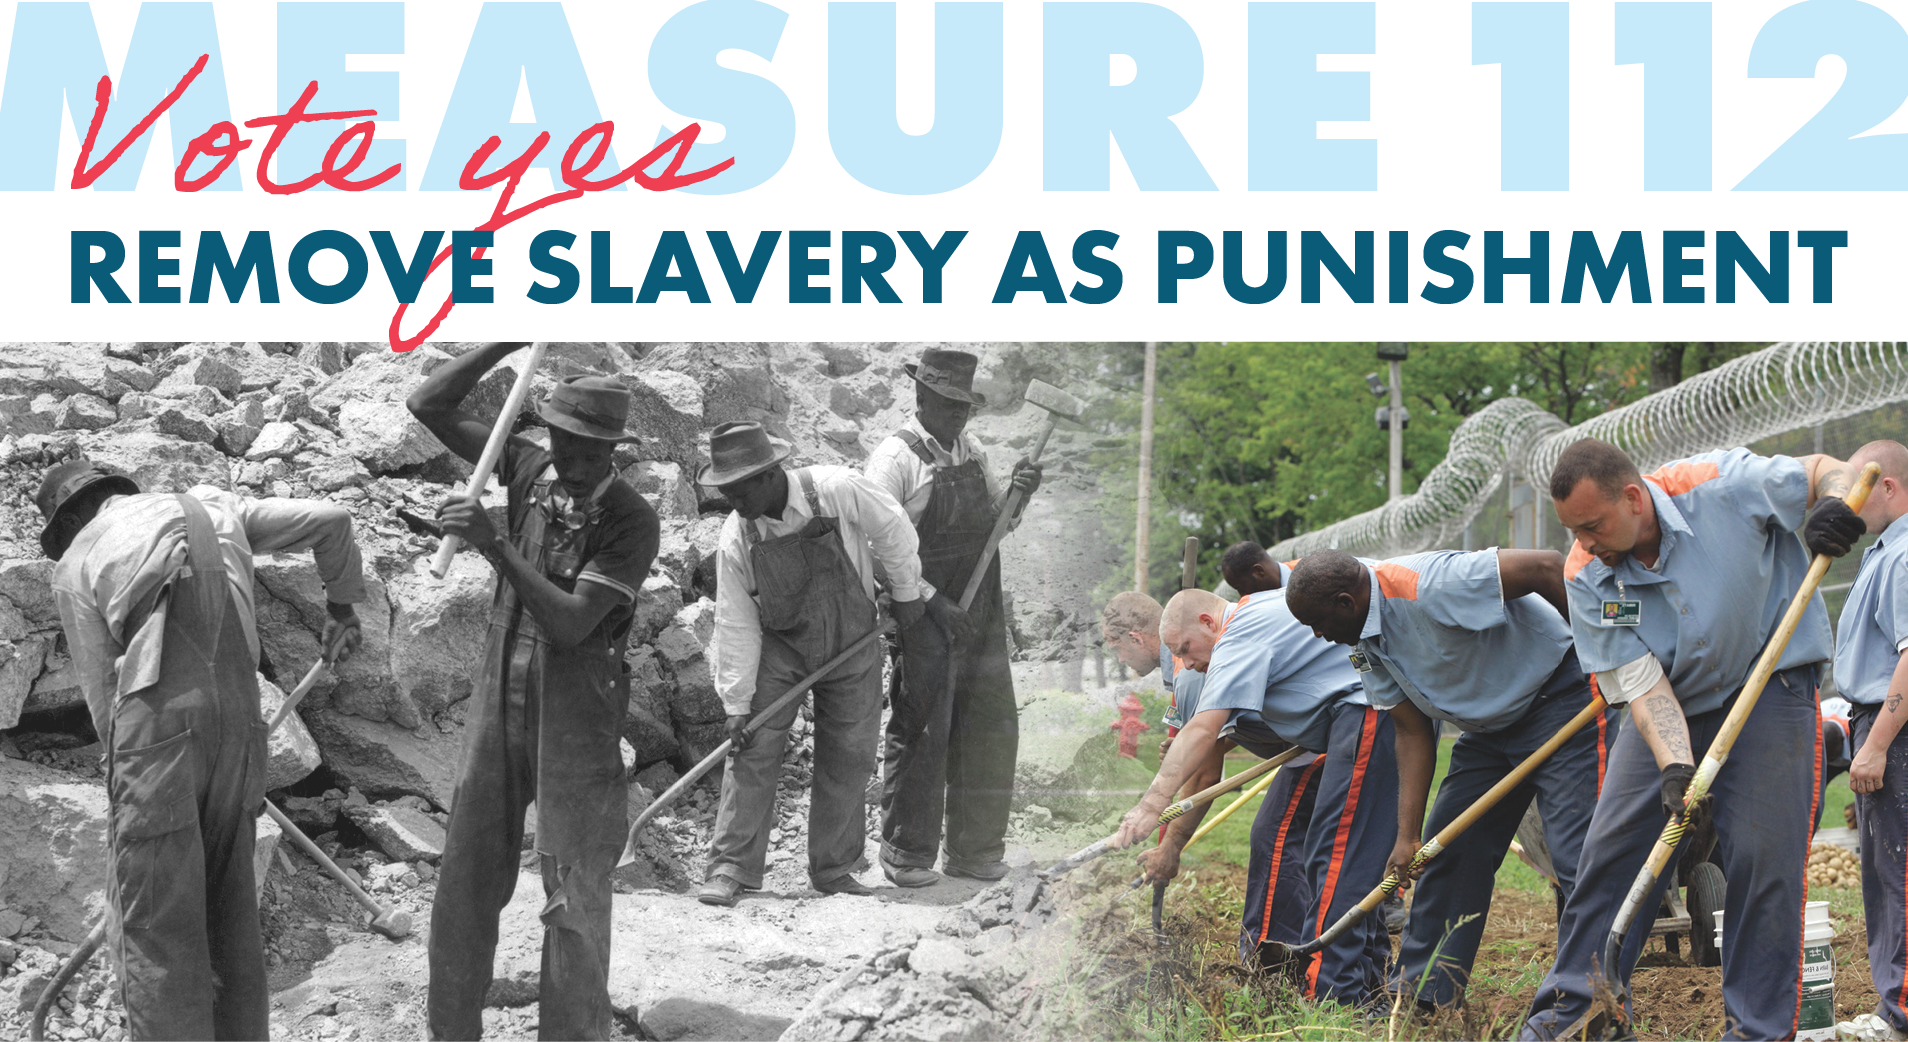 Fall 2022 VOICE / Voters’ Guide: Measure 112, Remove Slavery as Punishment